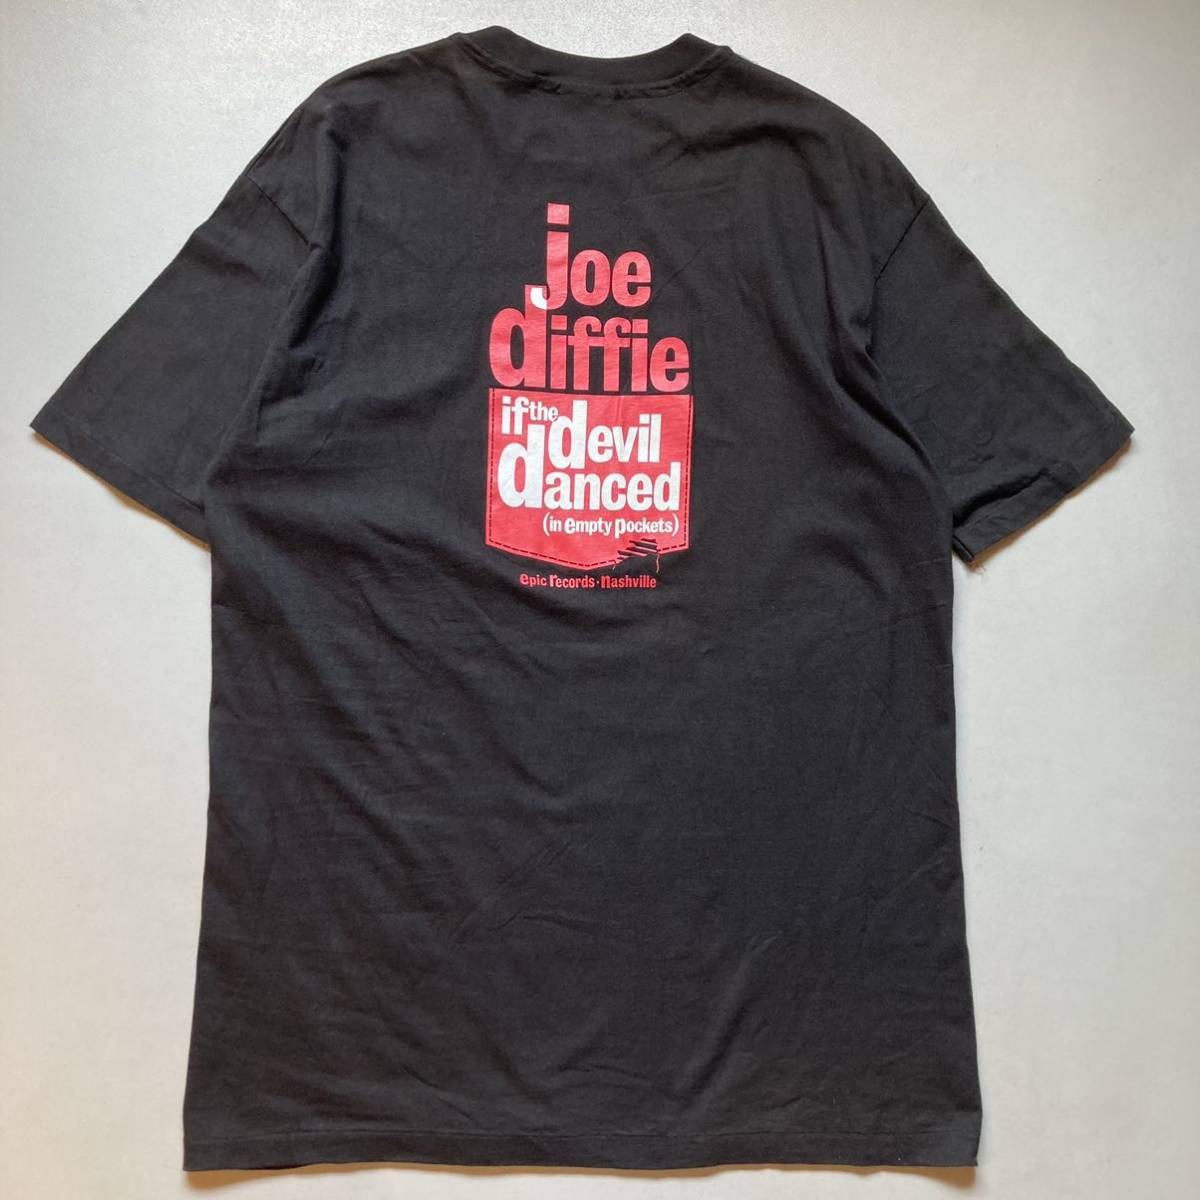 90s joe diffie T-shirt シンガーソングライター　Tシャツ　made in USA アメリカ製Tee プリントTシャツ